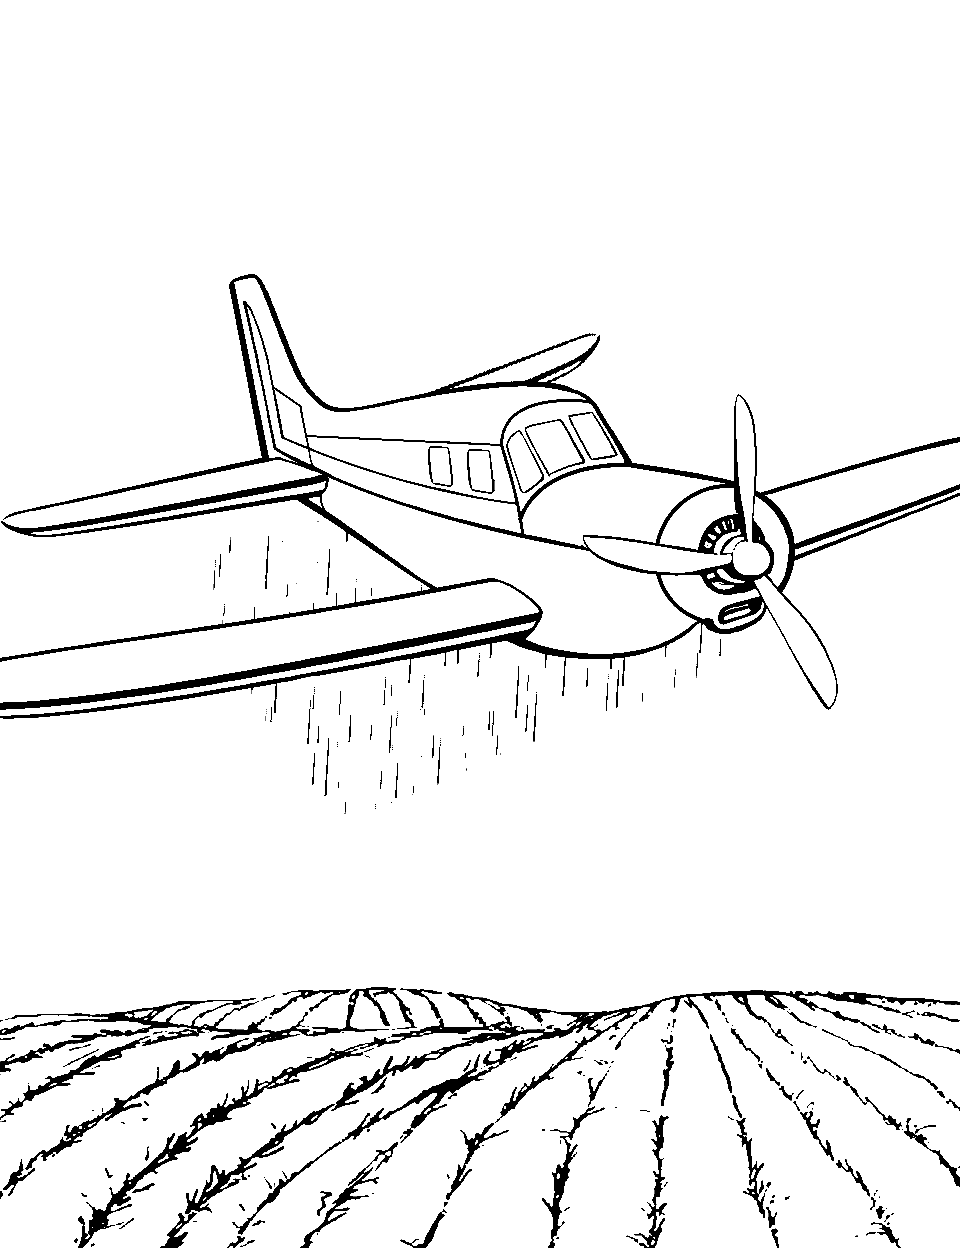 Crop Duster at Work Airplane Coloring Page - A crop duster plane flying to spray over a field of crops.